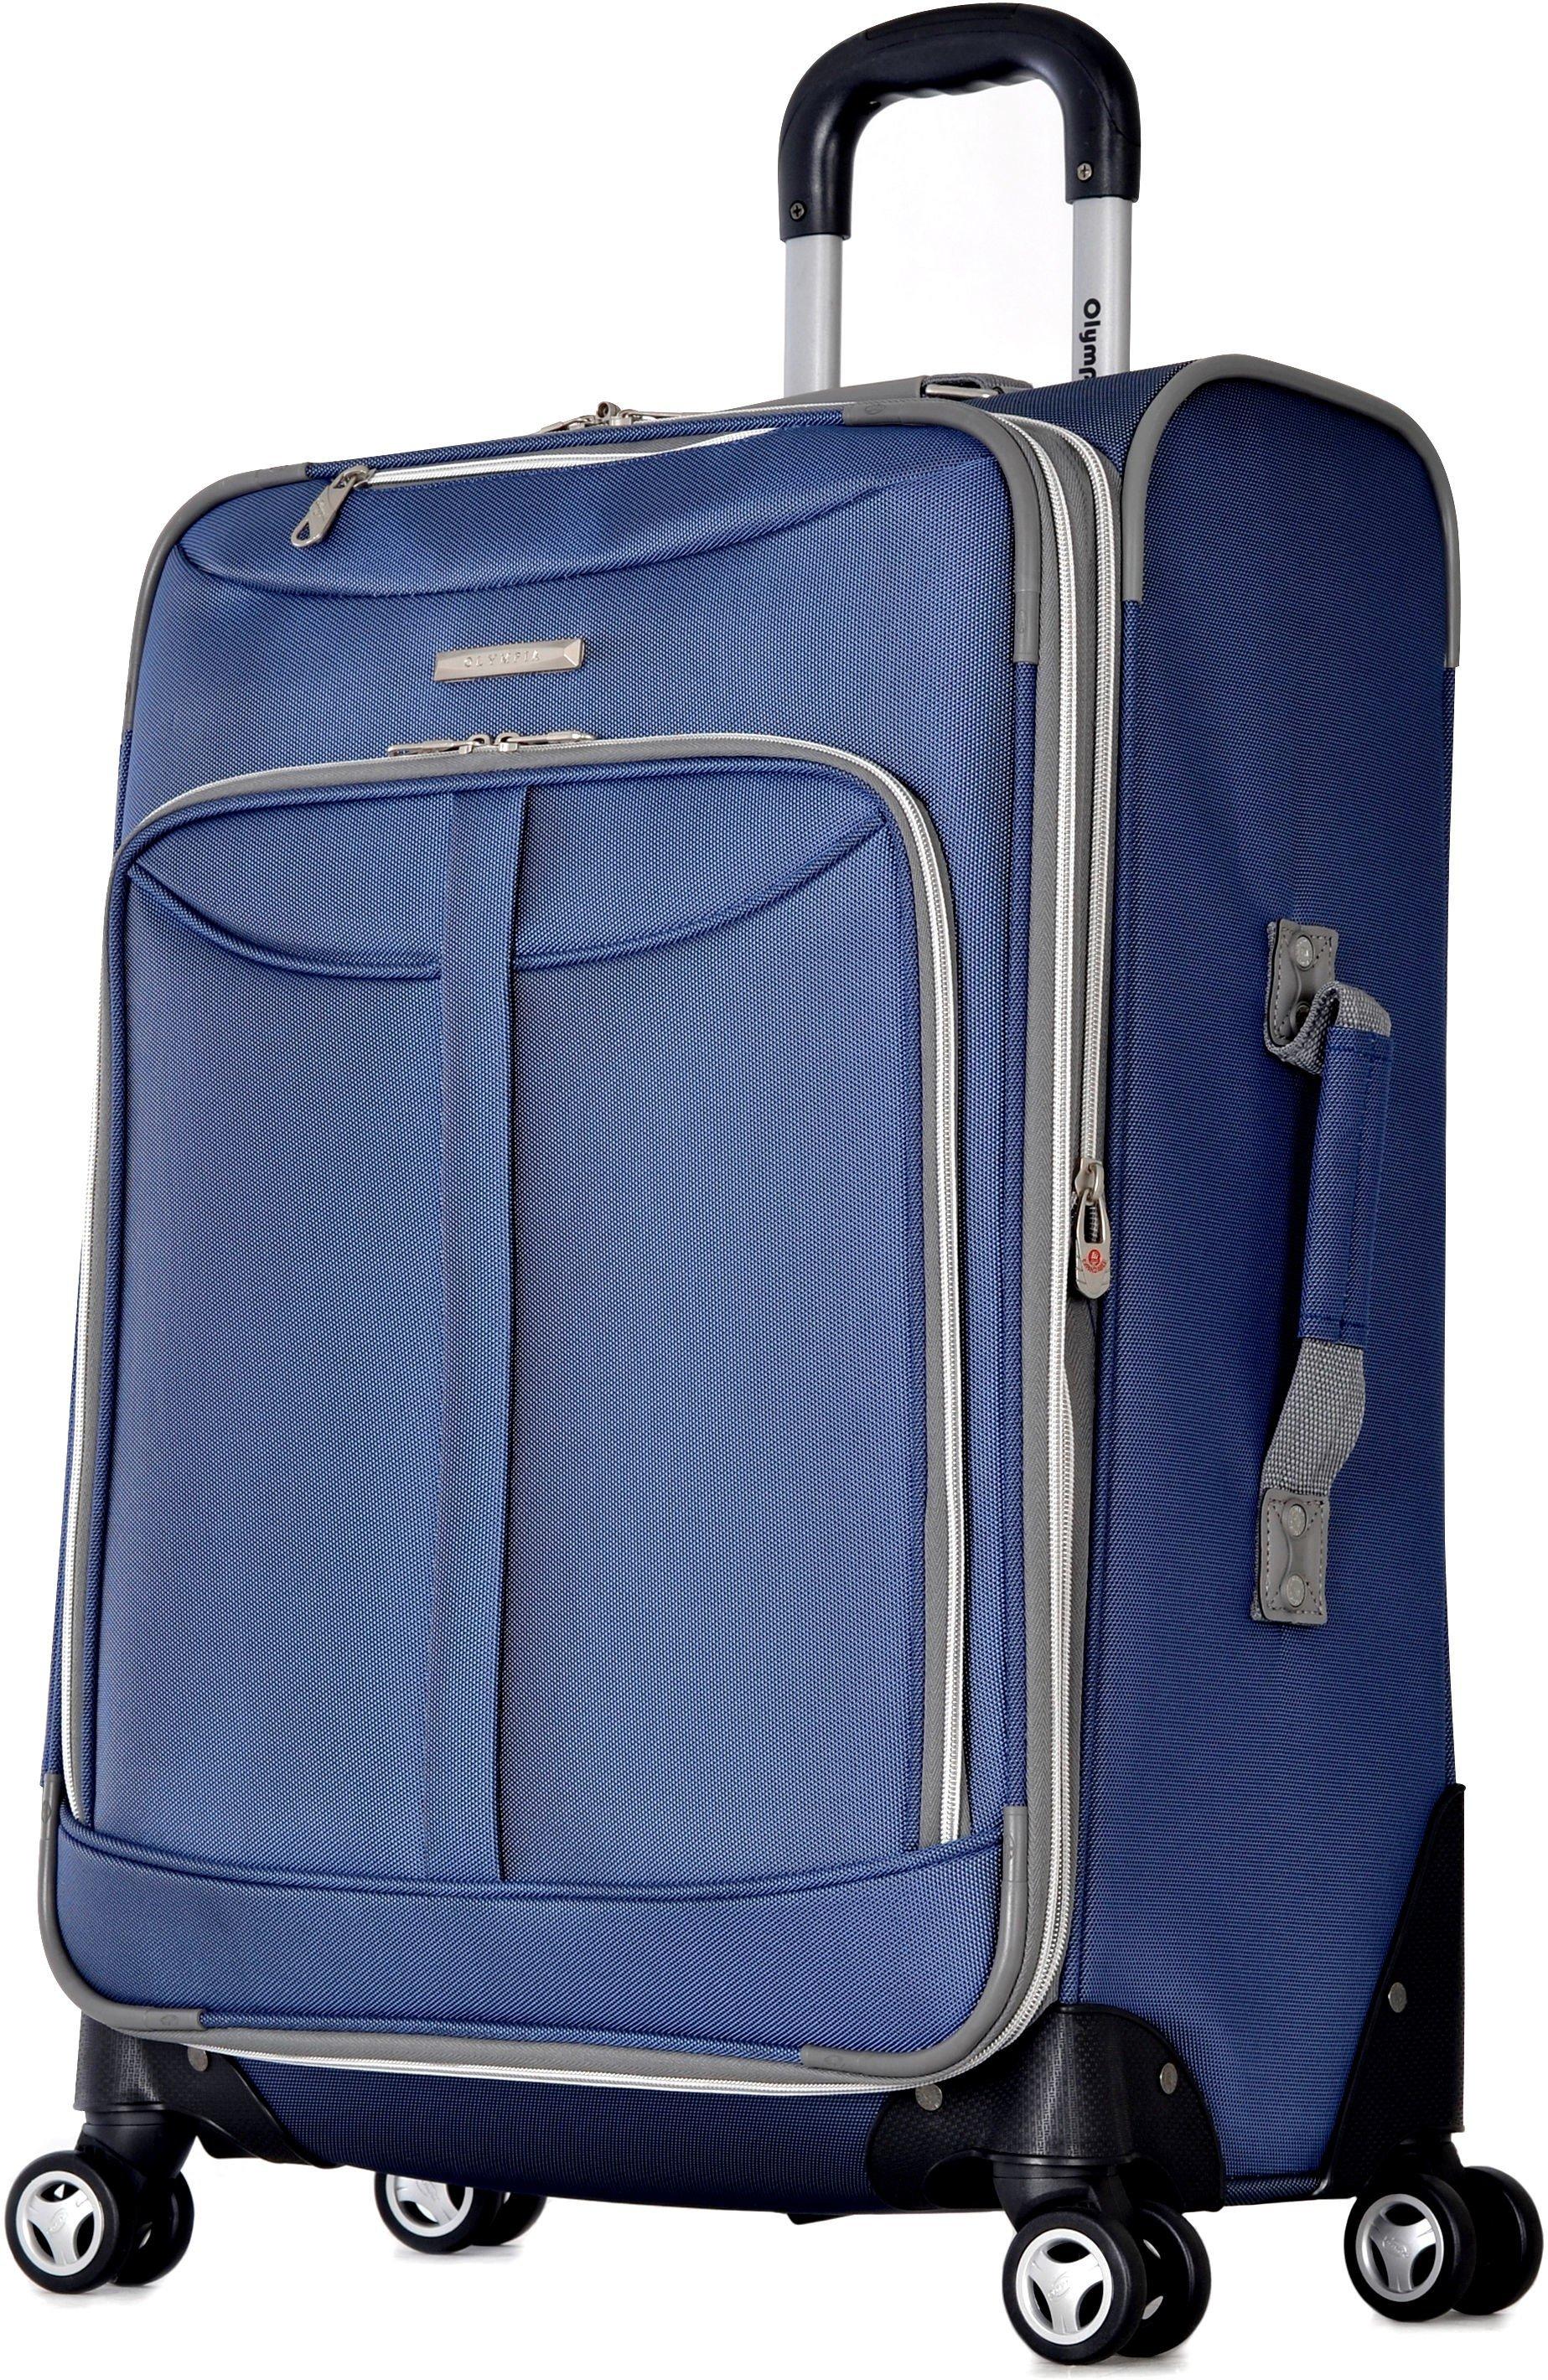 25 Inch Tuscany Spinner Luggage